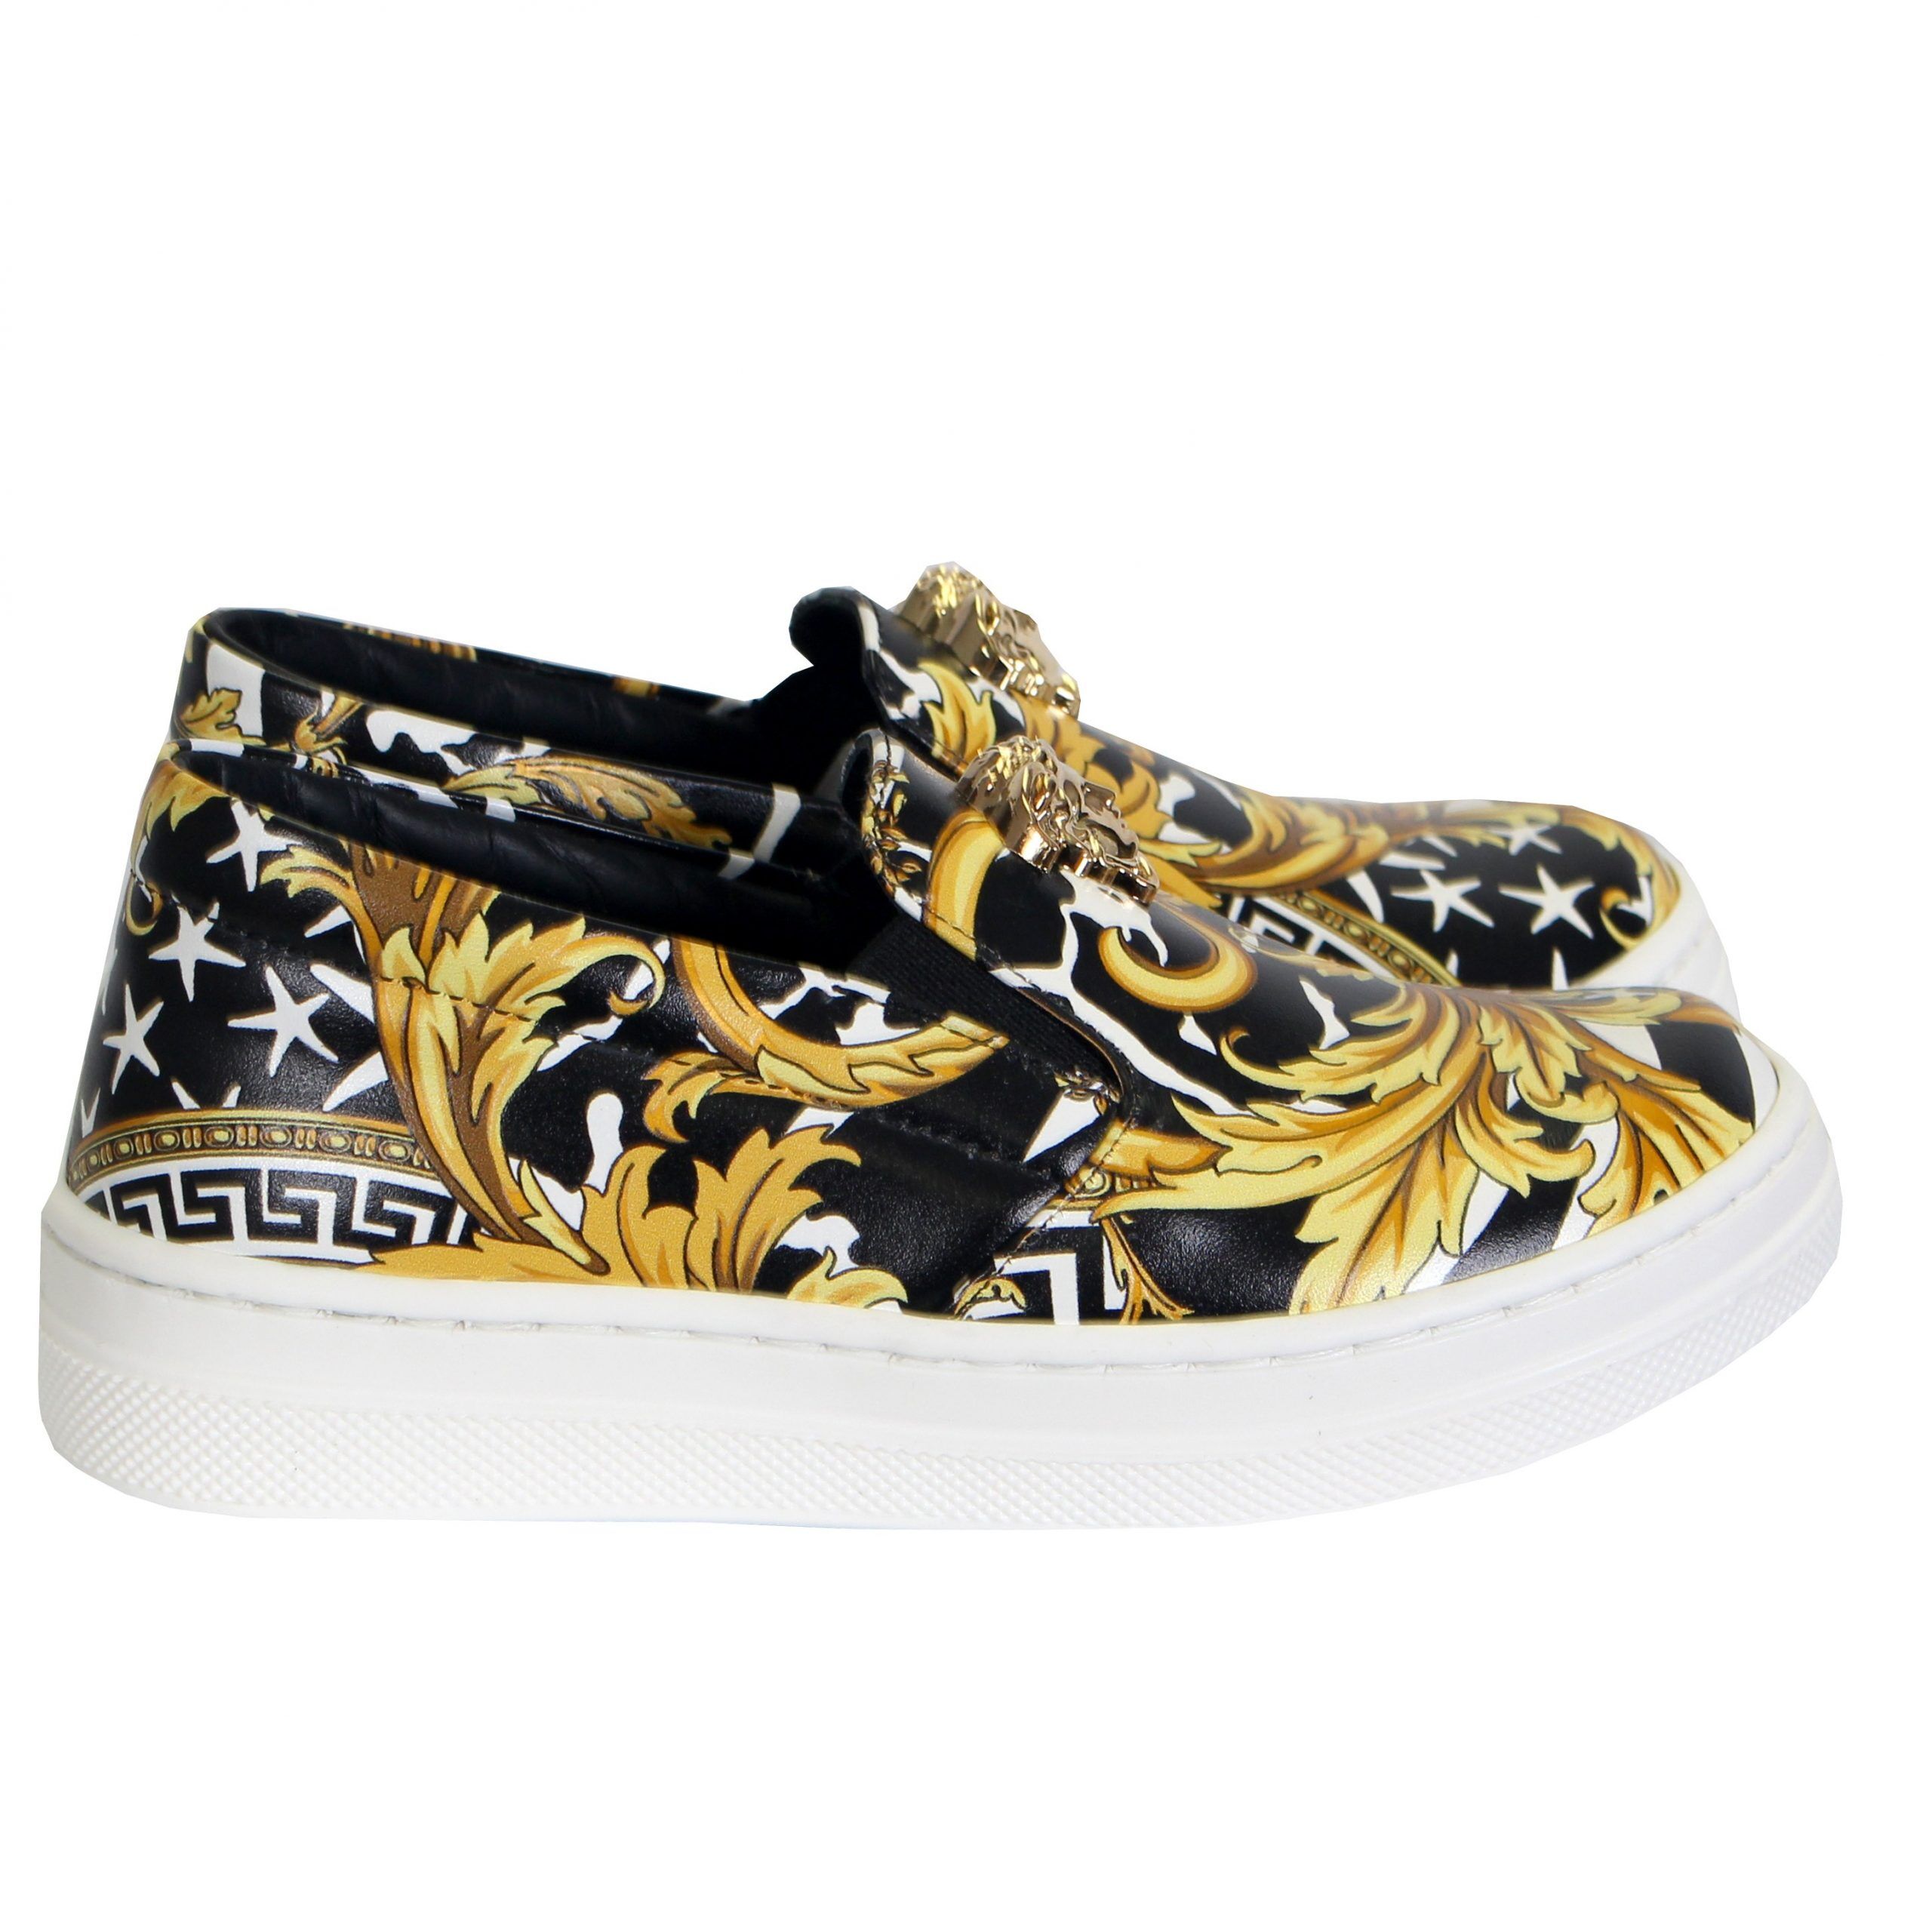 young versace shoes sale